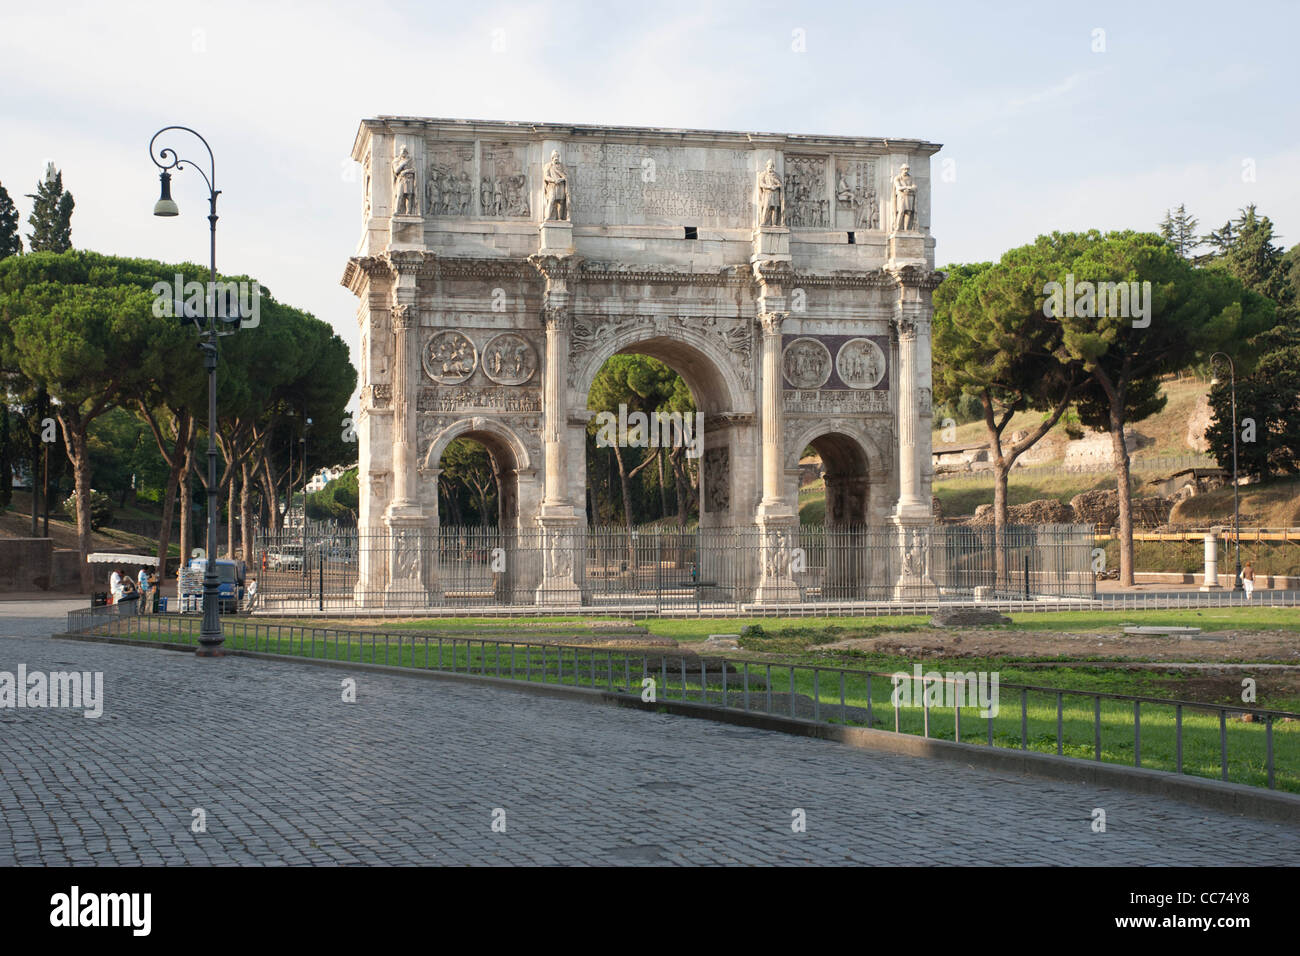 This huge triumphal arch (21 meters high), with three barrel-vaulted passageways, was erected to commemorate Constantine's victory over Maxentius at the Battle of Milvian Bridge in 312. It is just west of the Colosseum and dwarfs the nearby Arch of Titus. It incorporates recycled sculpture from earl Stock Photo